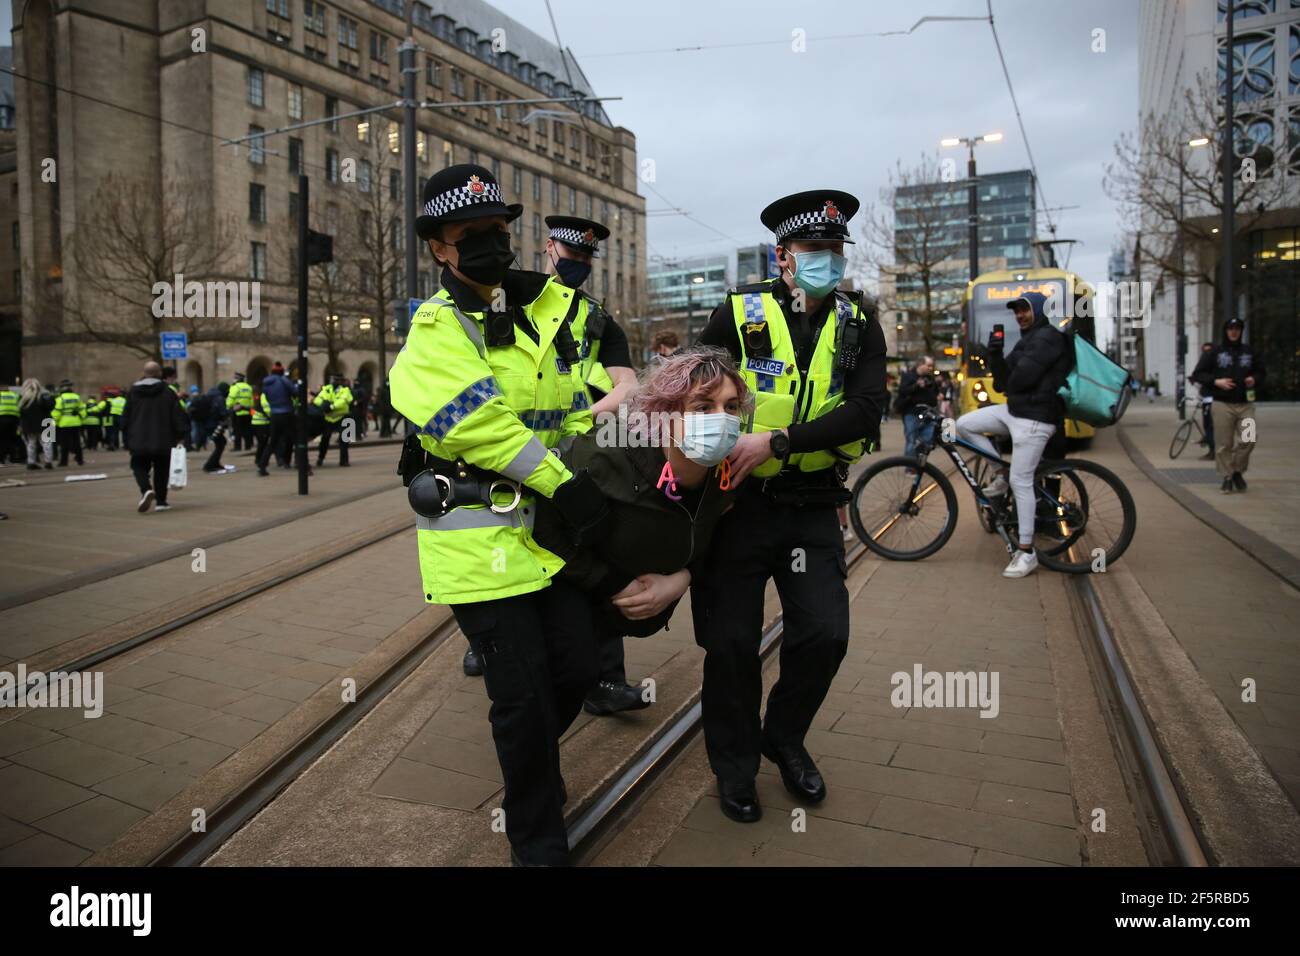 Manchester, UK. 27th March, 2021. Hundreds of protesters took to the streets in a 'Kill The Bill' demonstration.  The protesters caused hours of traffic chaos around the city centre by holding sit down protests.  Buses on Oxford Road had to be turned around and take alternative routes.  A late afternoon stand off with police occurred as the protesters blocked tram lines.  After requests to move on where ignored, the police Tactical Aid Unit moved in and grabbed several of the protesters.  Several arrests were made. Manchester, UK. Credit: Barbara Cook/Alamy Live News Stock Photo